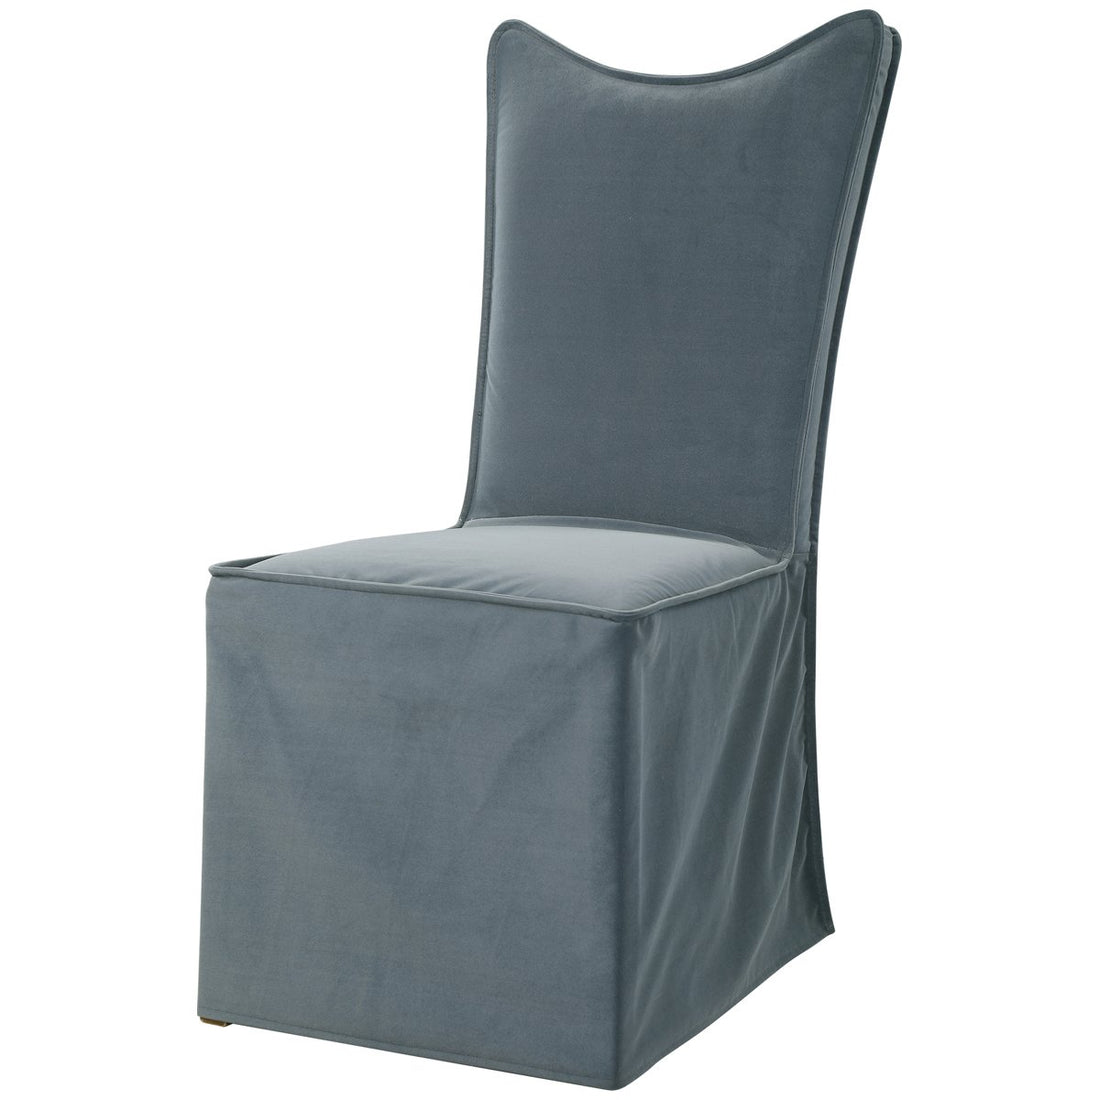 Uttermost Delroy Gray Armless Chair, Set of 2